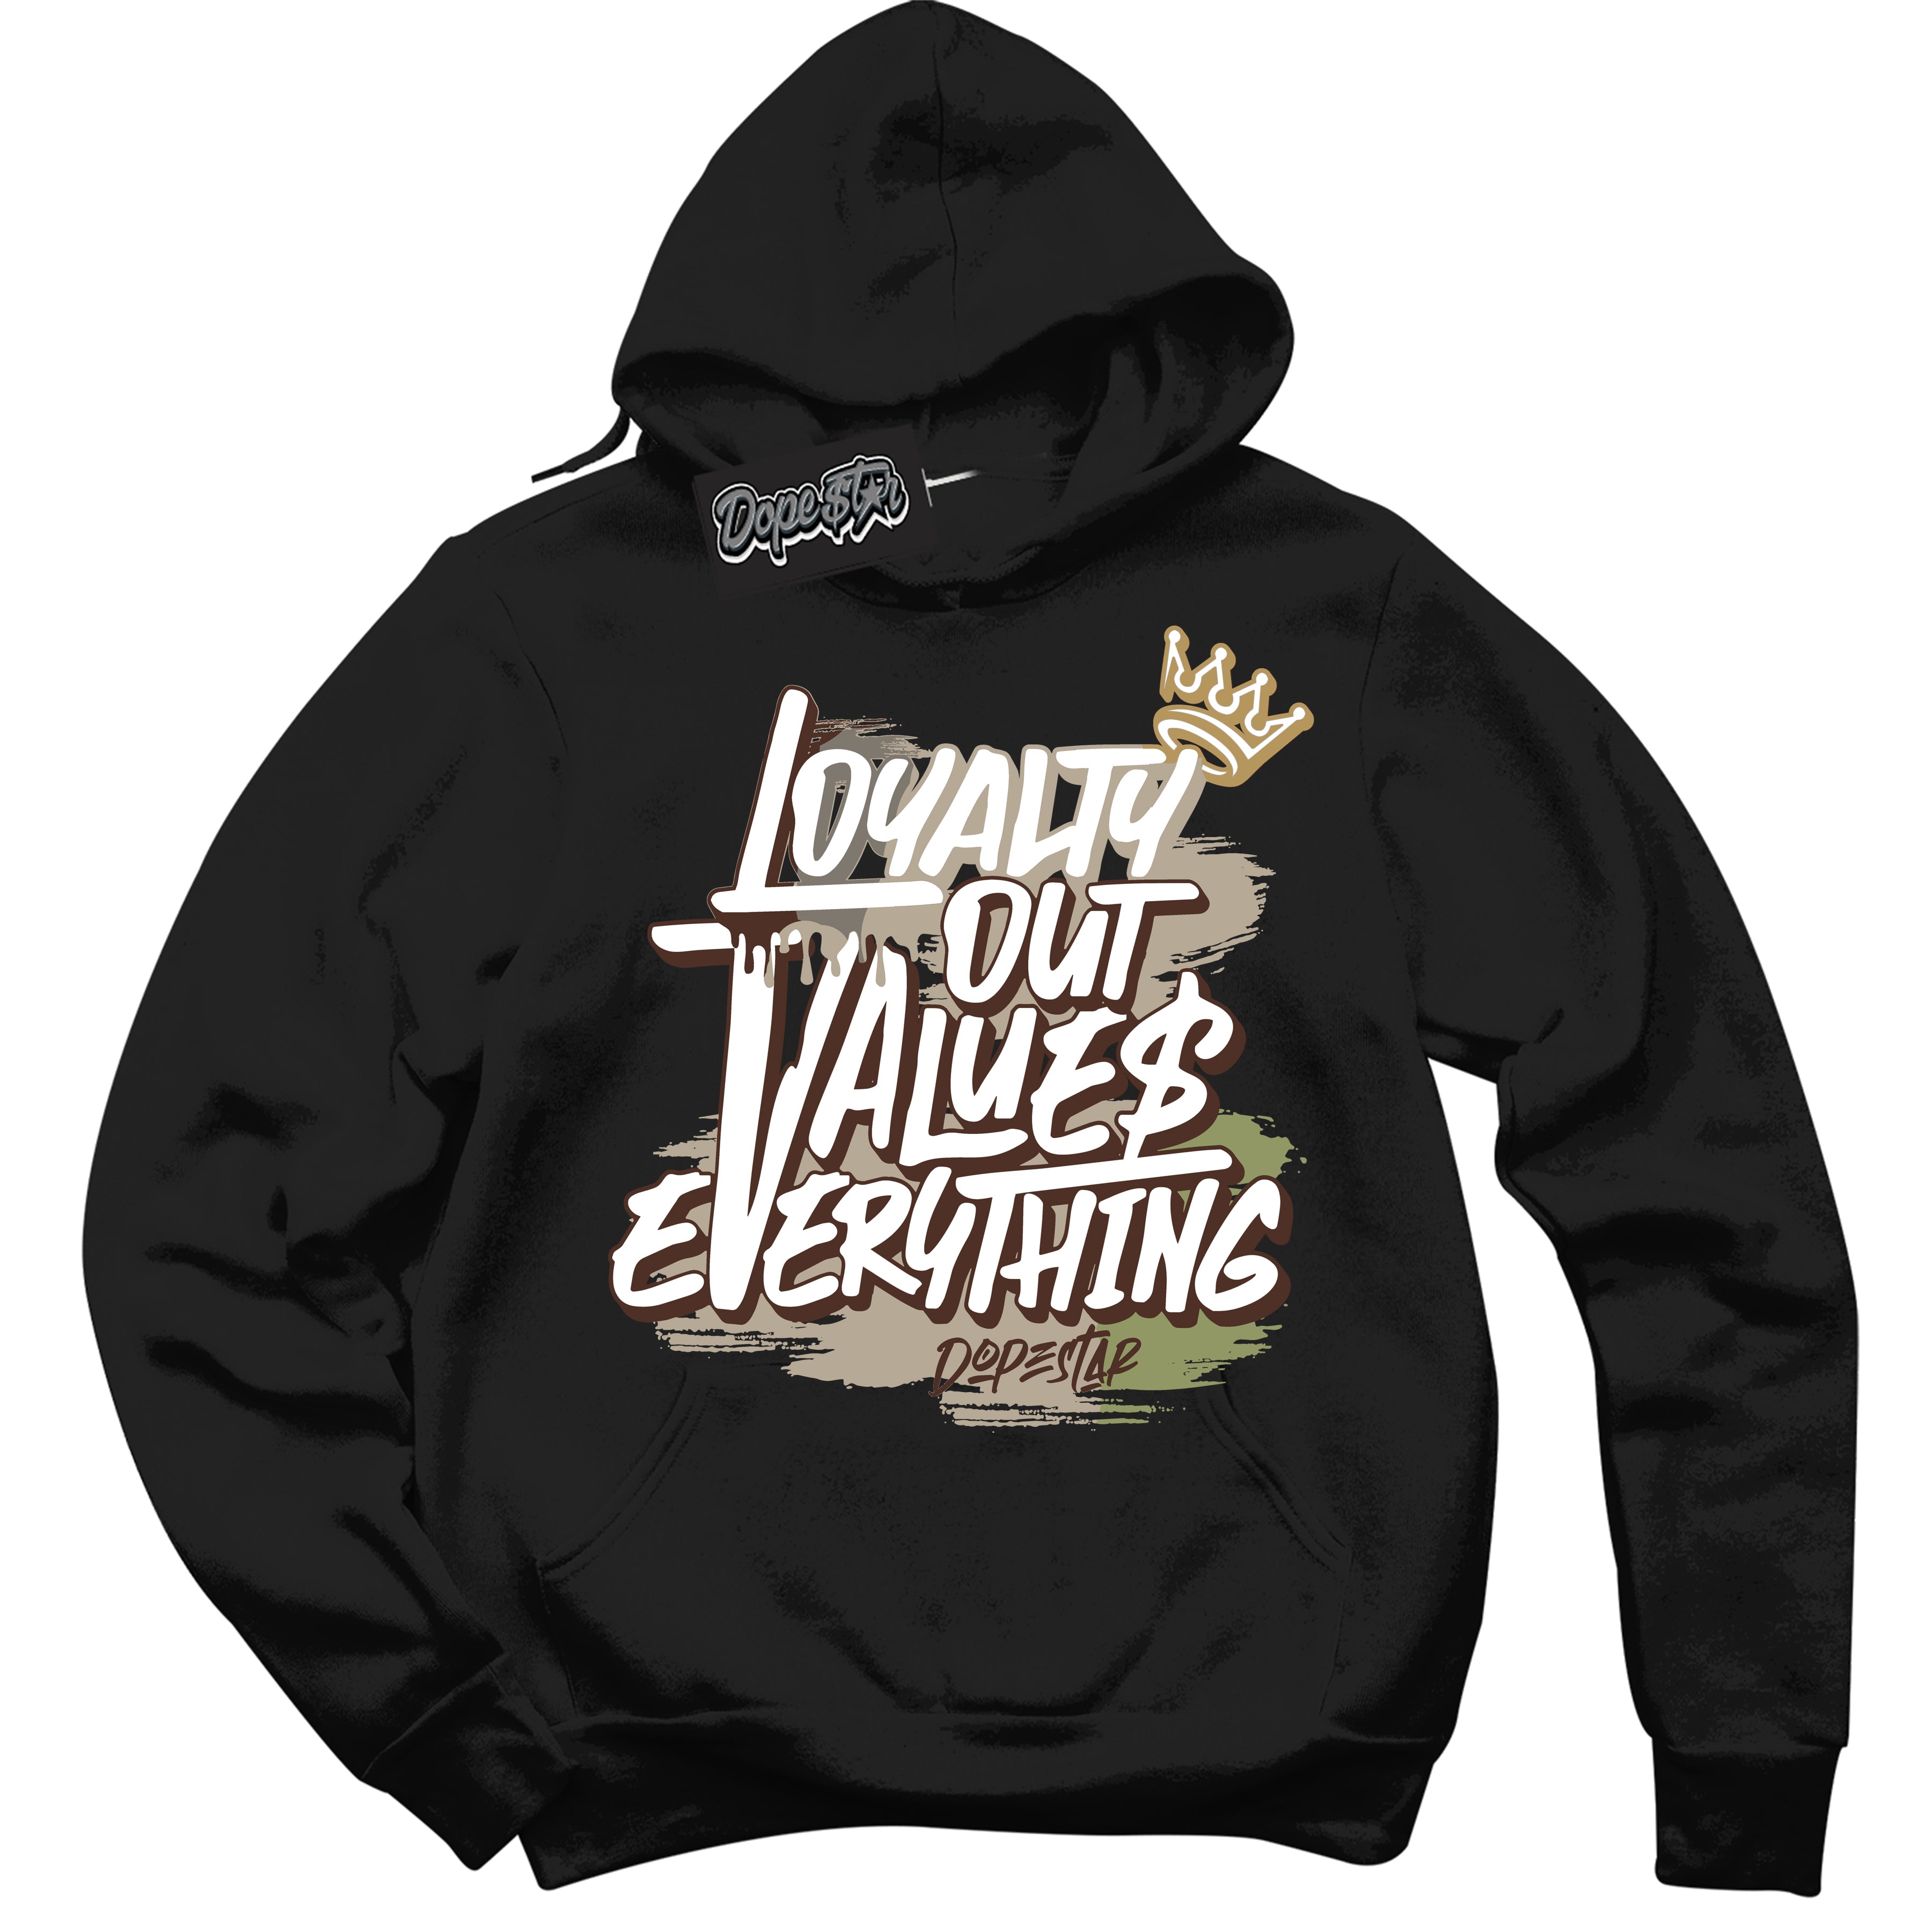 Cool Black Hoodie with “ Loyalty Out Values Everything ”  design that Perfectly Matches  Zion Williamson Voodoo 1s Sneakers.